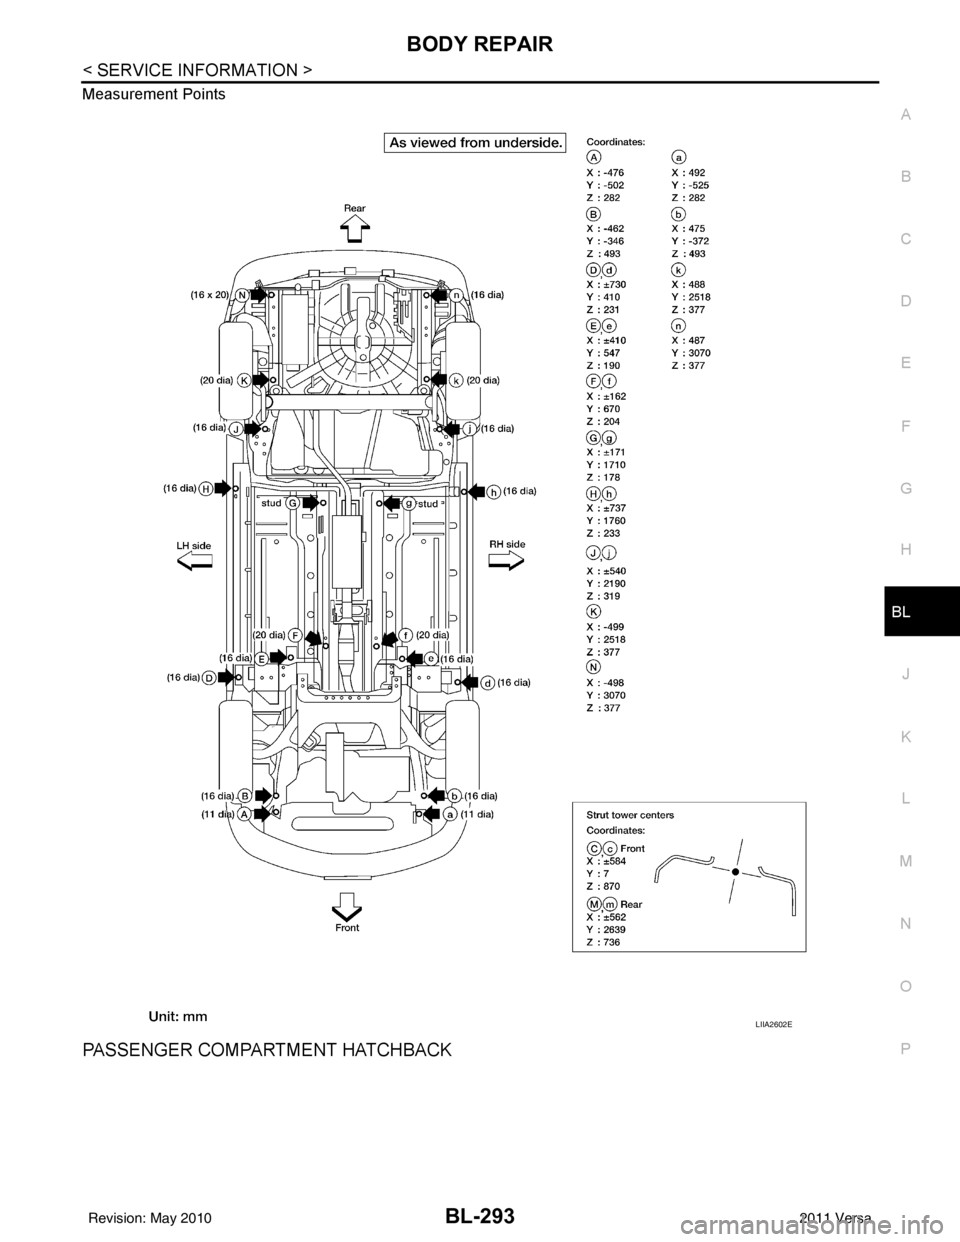 NISSAN LATIO 2011  Service Repair Manual BODY REPAIRBL-293
< SERVICE INFORMATION >
C
DE
F
G H
J
K L
M A
B
BL
N
O P
Measurement Points
PASSENGER COMPARTMENT HATCHBACK
LIIA2602E
Revision: May 2010
2011 Versa 